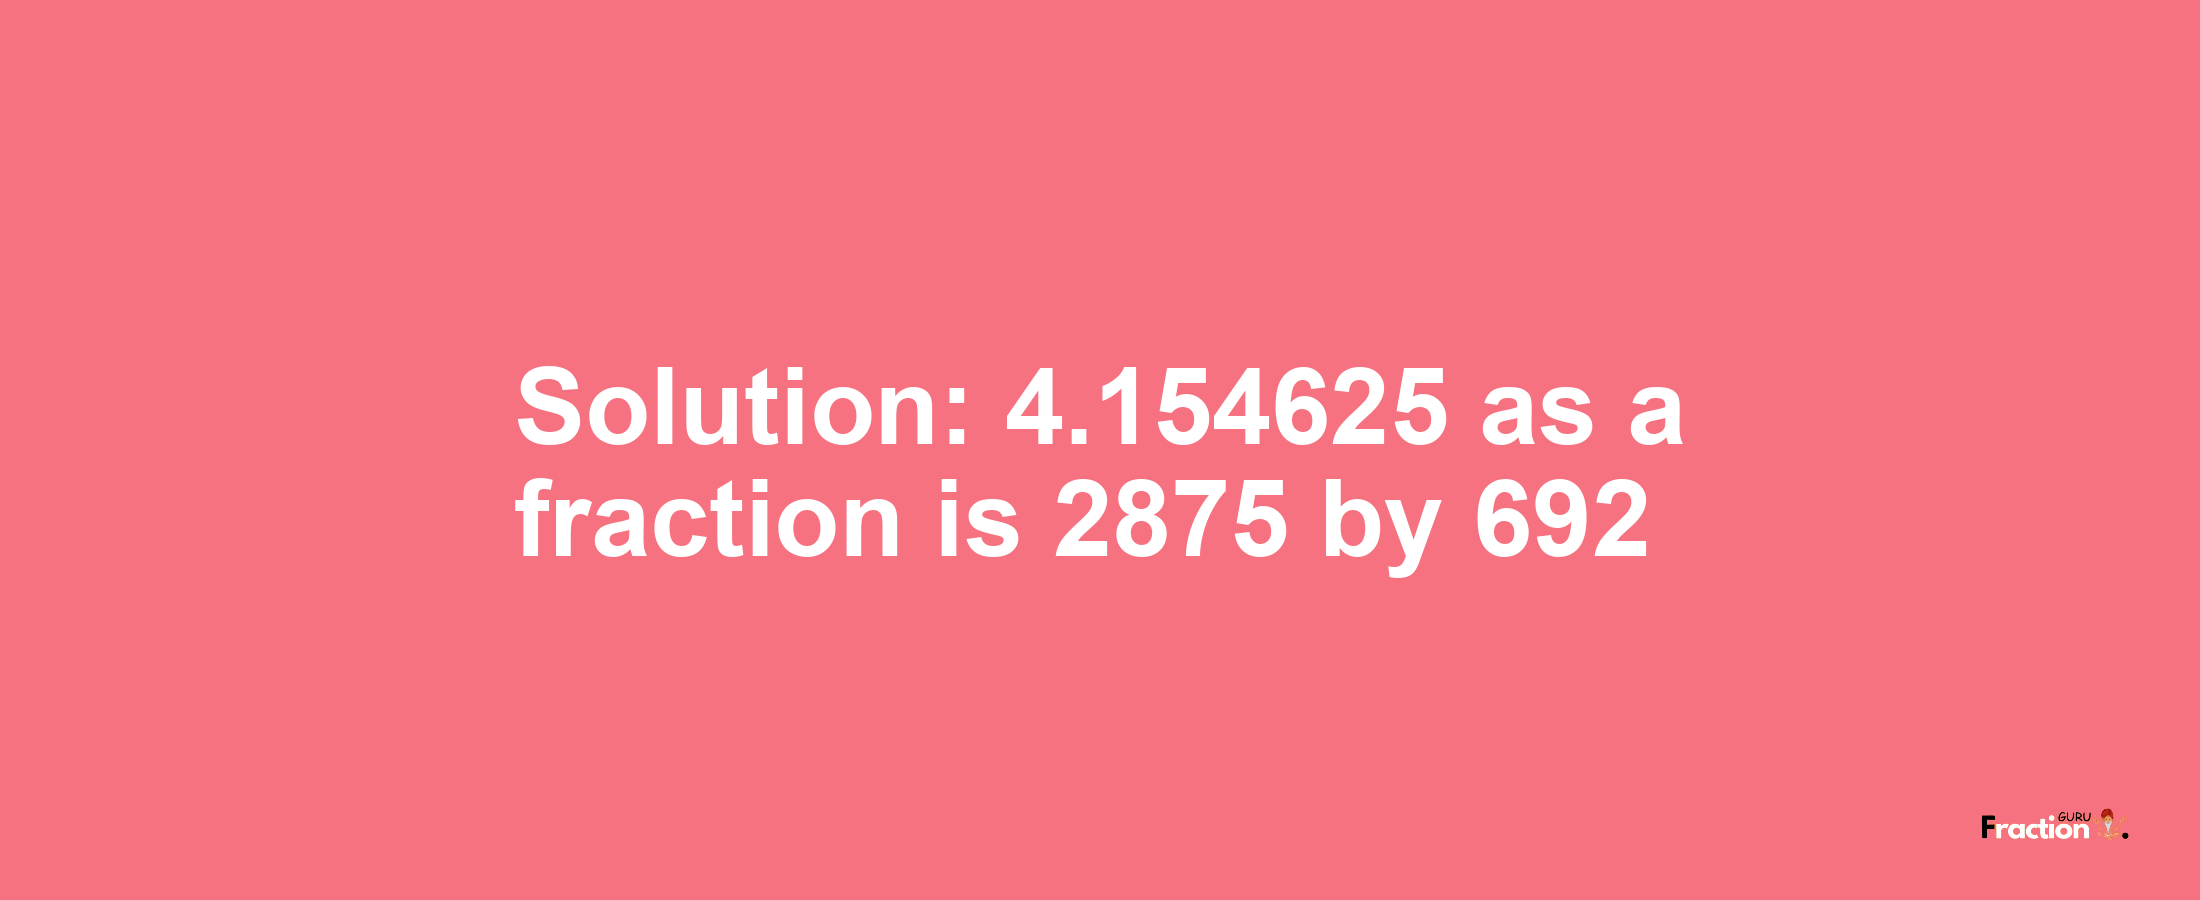 Solution:4.154625 as a fraction is 2875/692